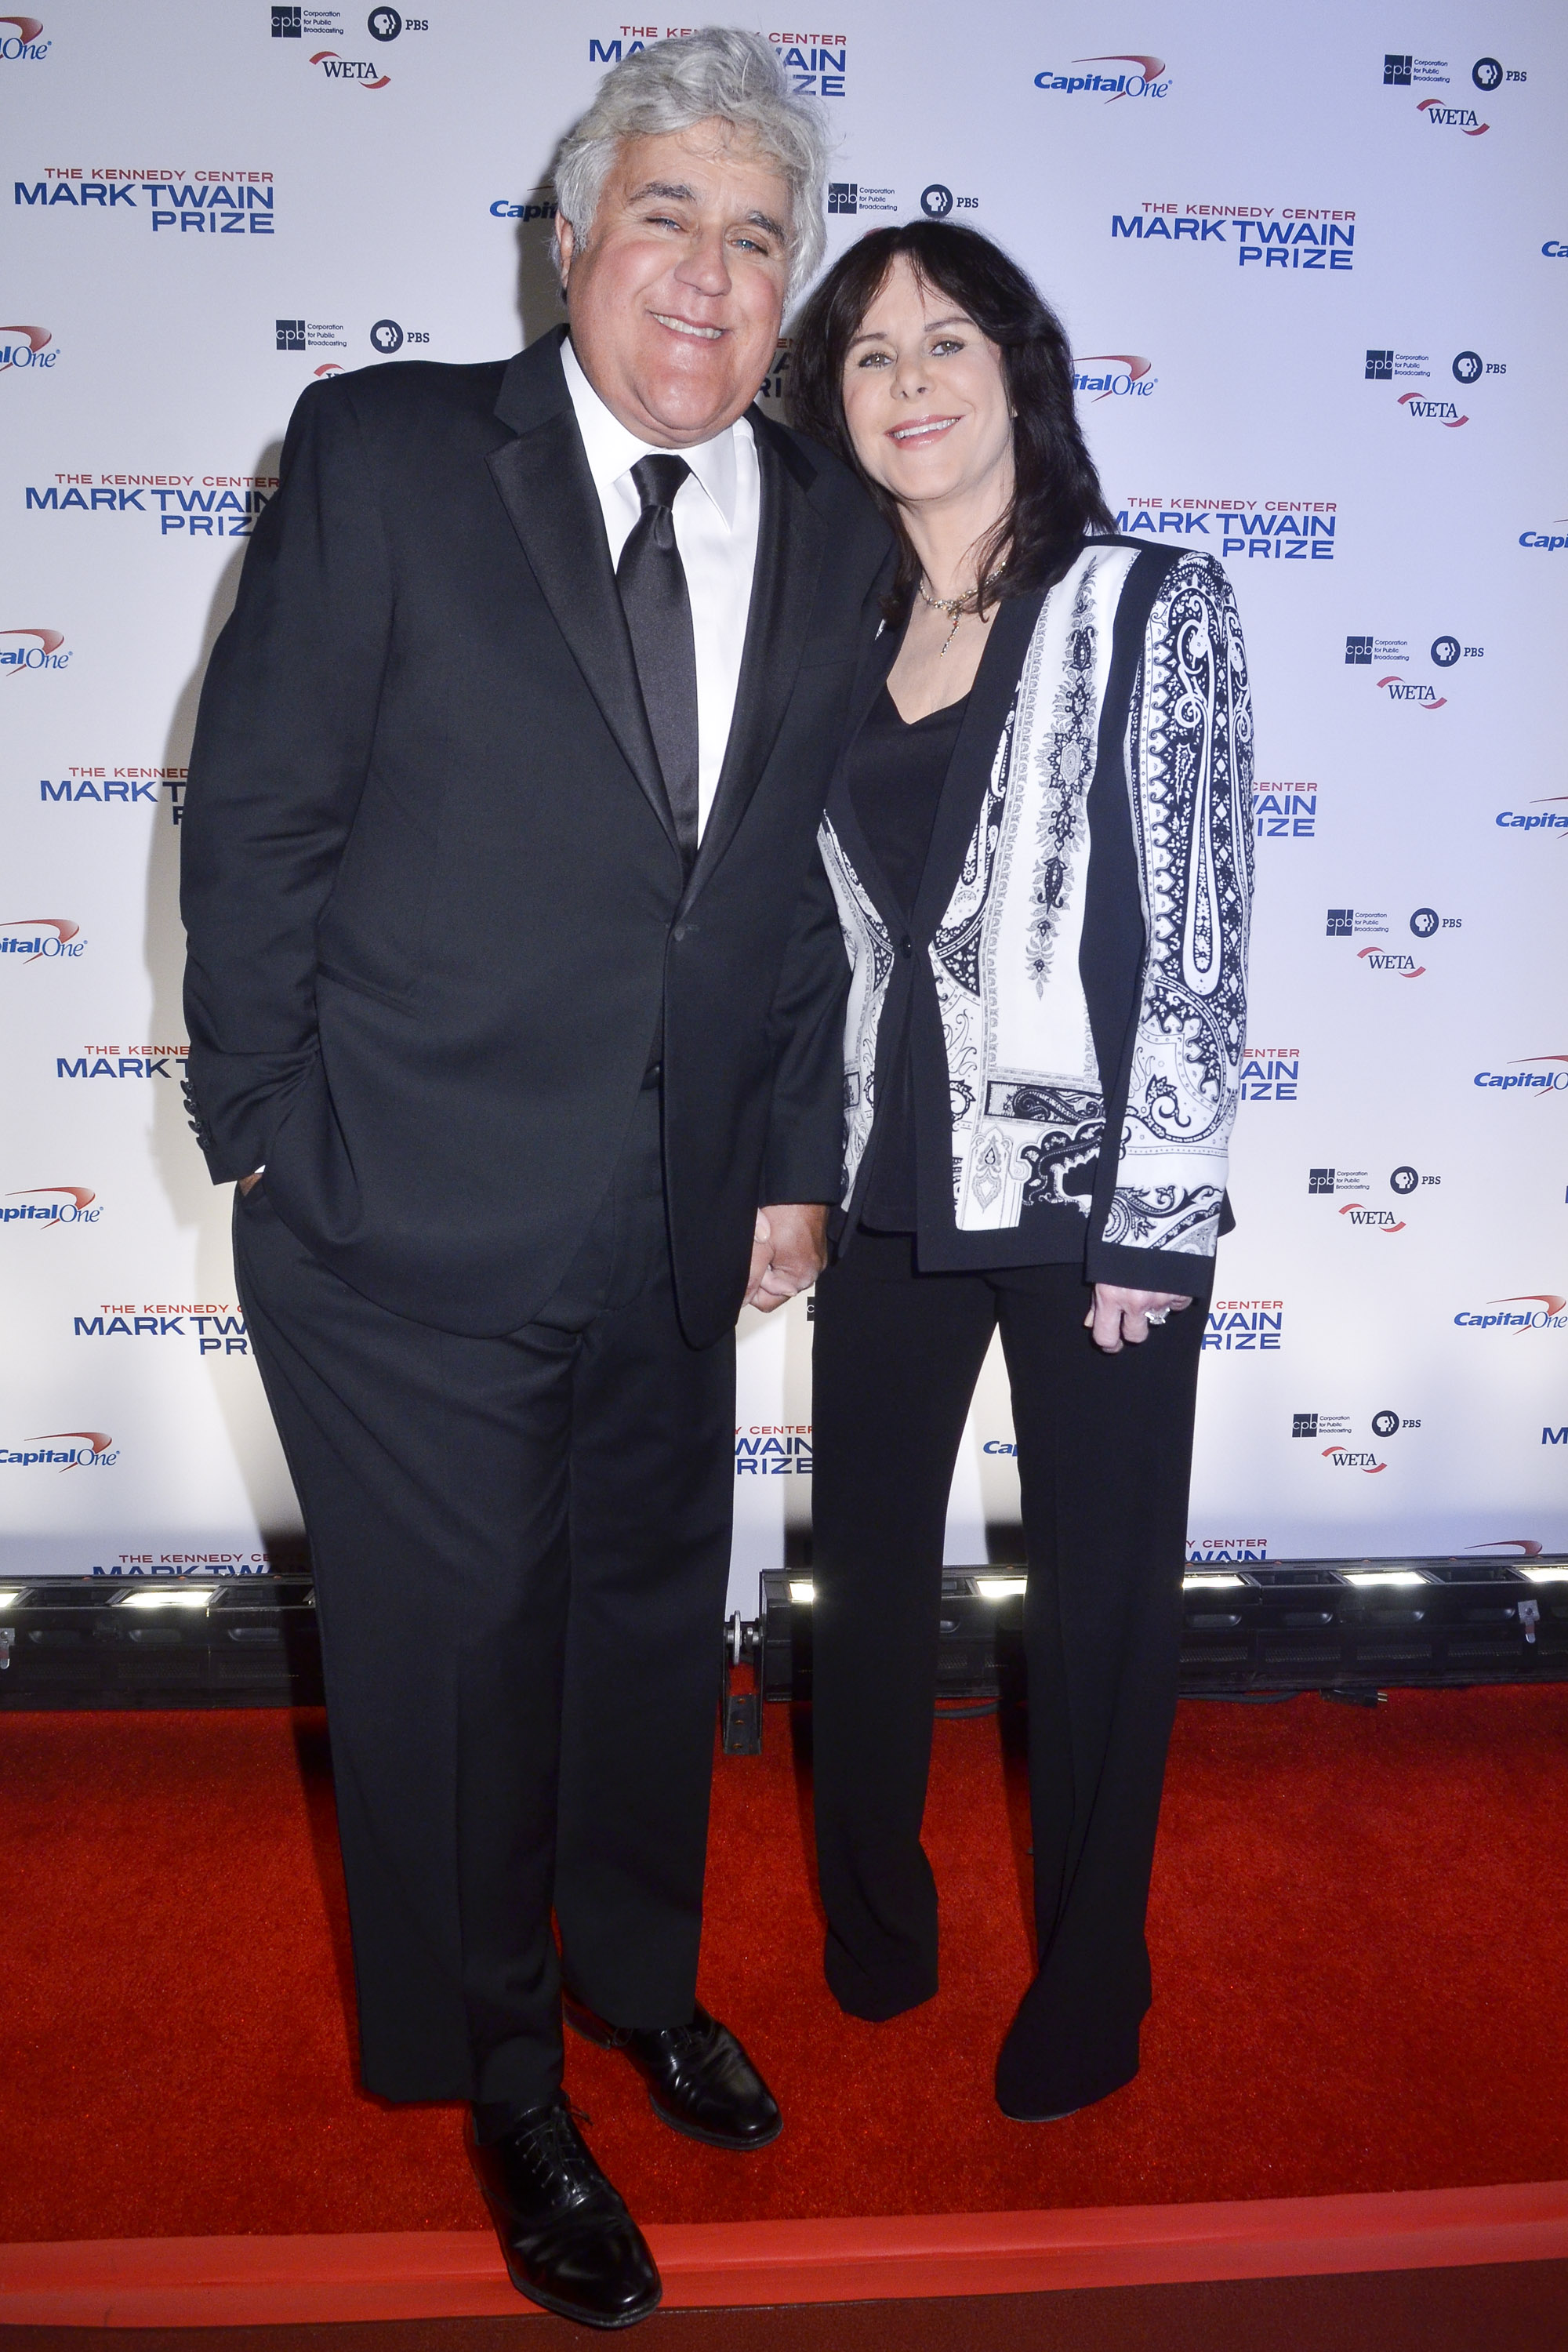 Jay and Mavis Leno at the Kennedy Center's Mark Twain Prize For Americacn Humor event in Washington, D.C. on October 19, 2014 | Source: Getty Images